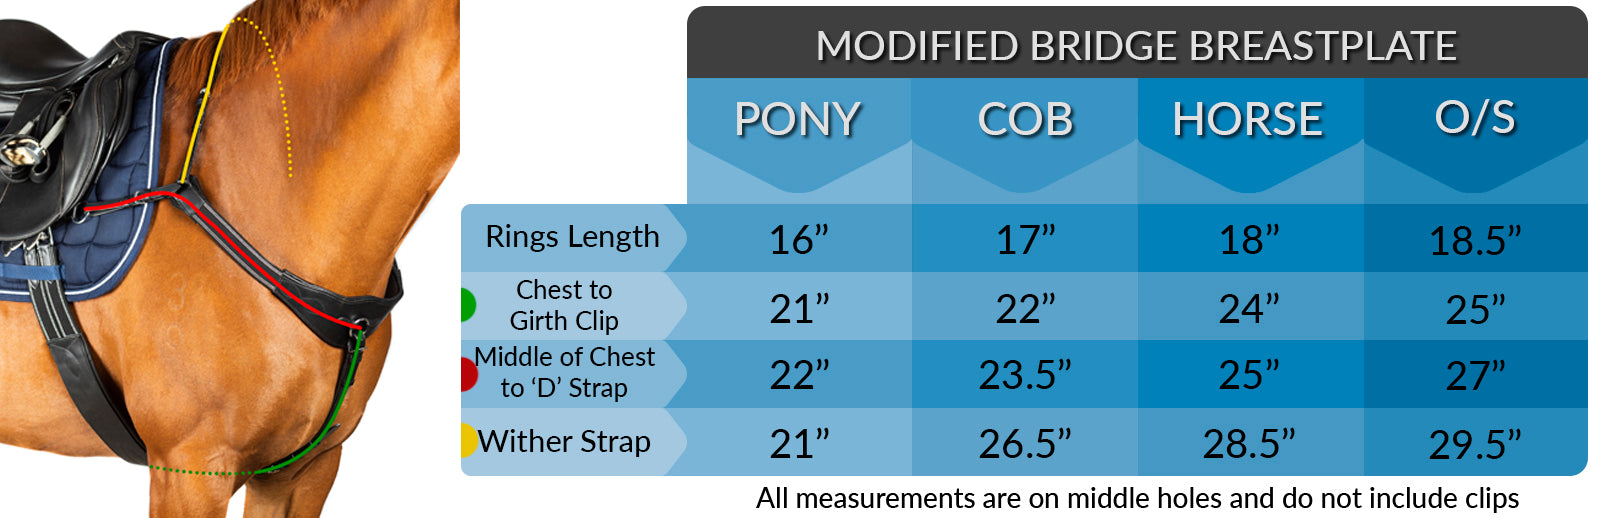 3 POINT BREASTPLATE MEASUREMENT